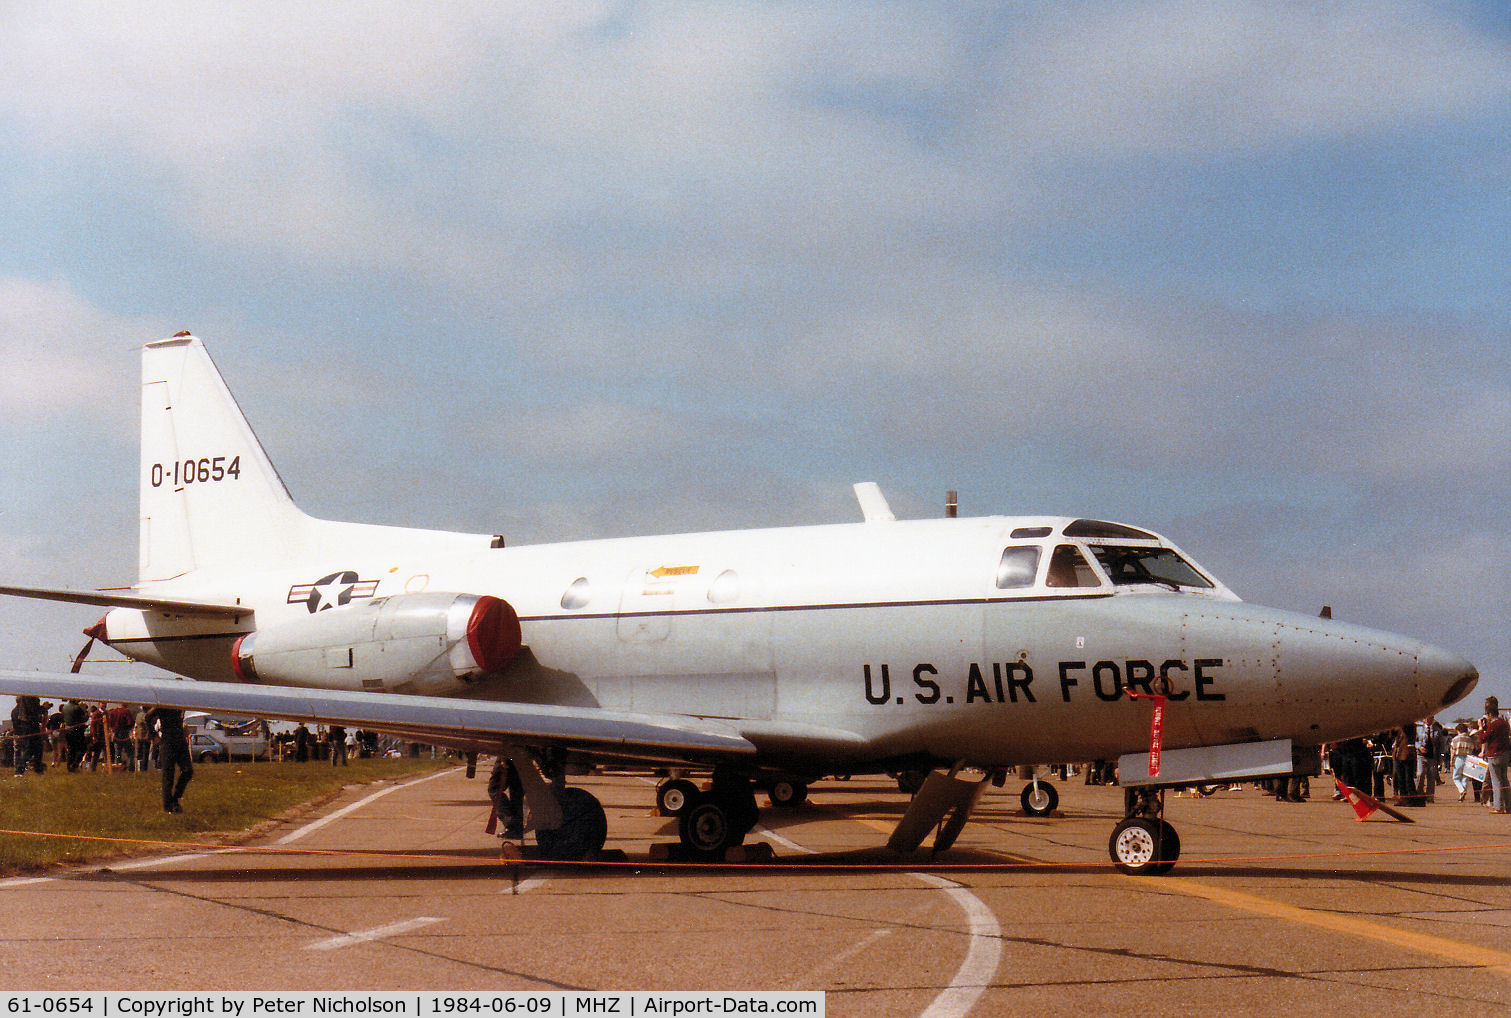 61-0654, 1961 North American CT-39A Sabreliner C/N 265-57, CT-39A Sabreliner of Ramstein's 58th Military Airlift Squadron on display at the 1984 RAF Mildenhall Air Fete.